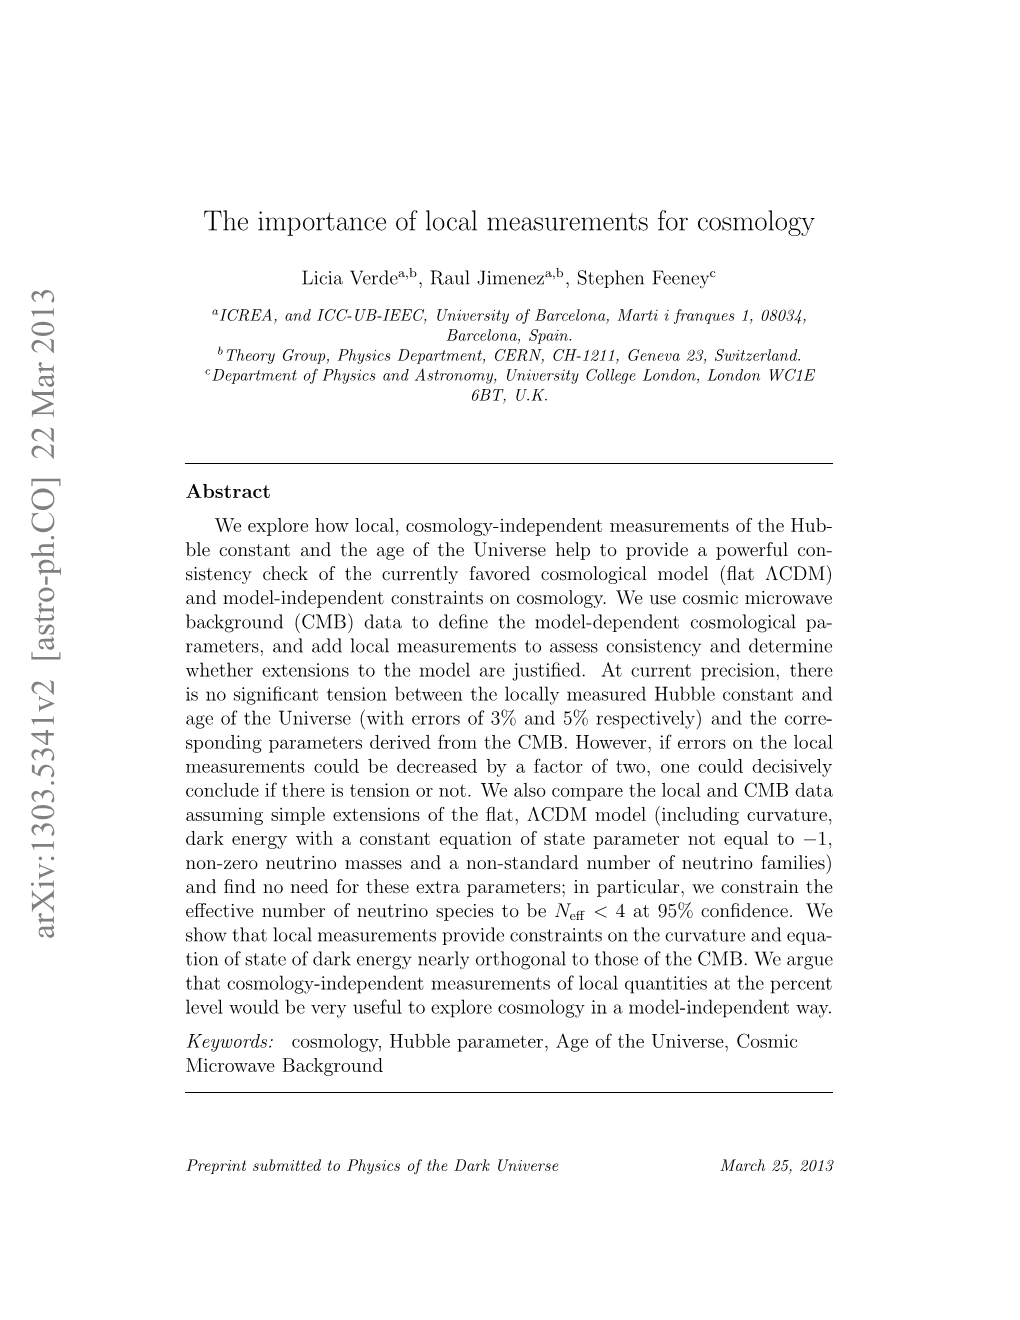 The Importance of Local Measurements for Cosmology